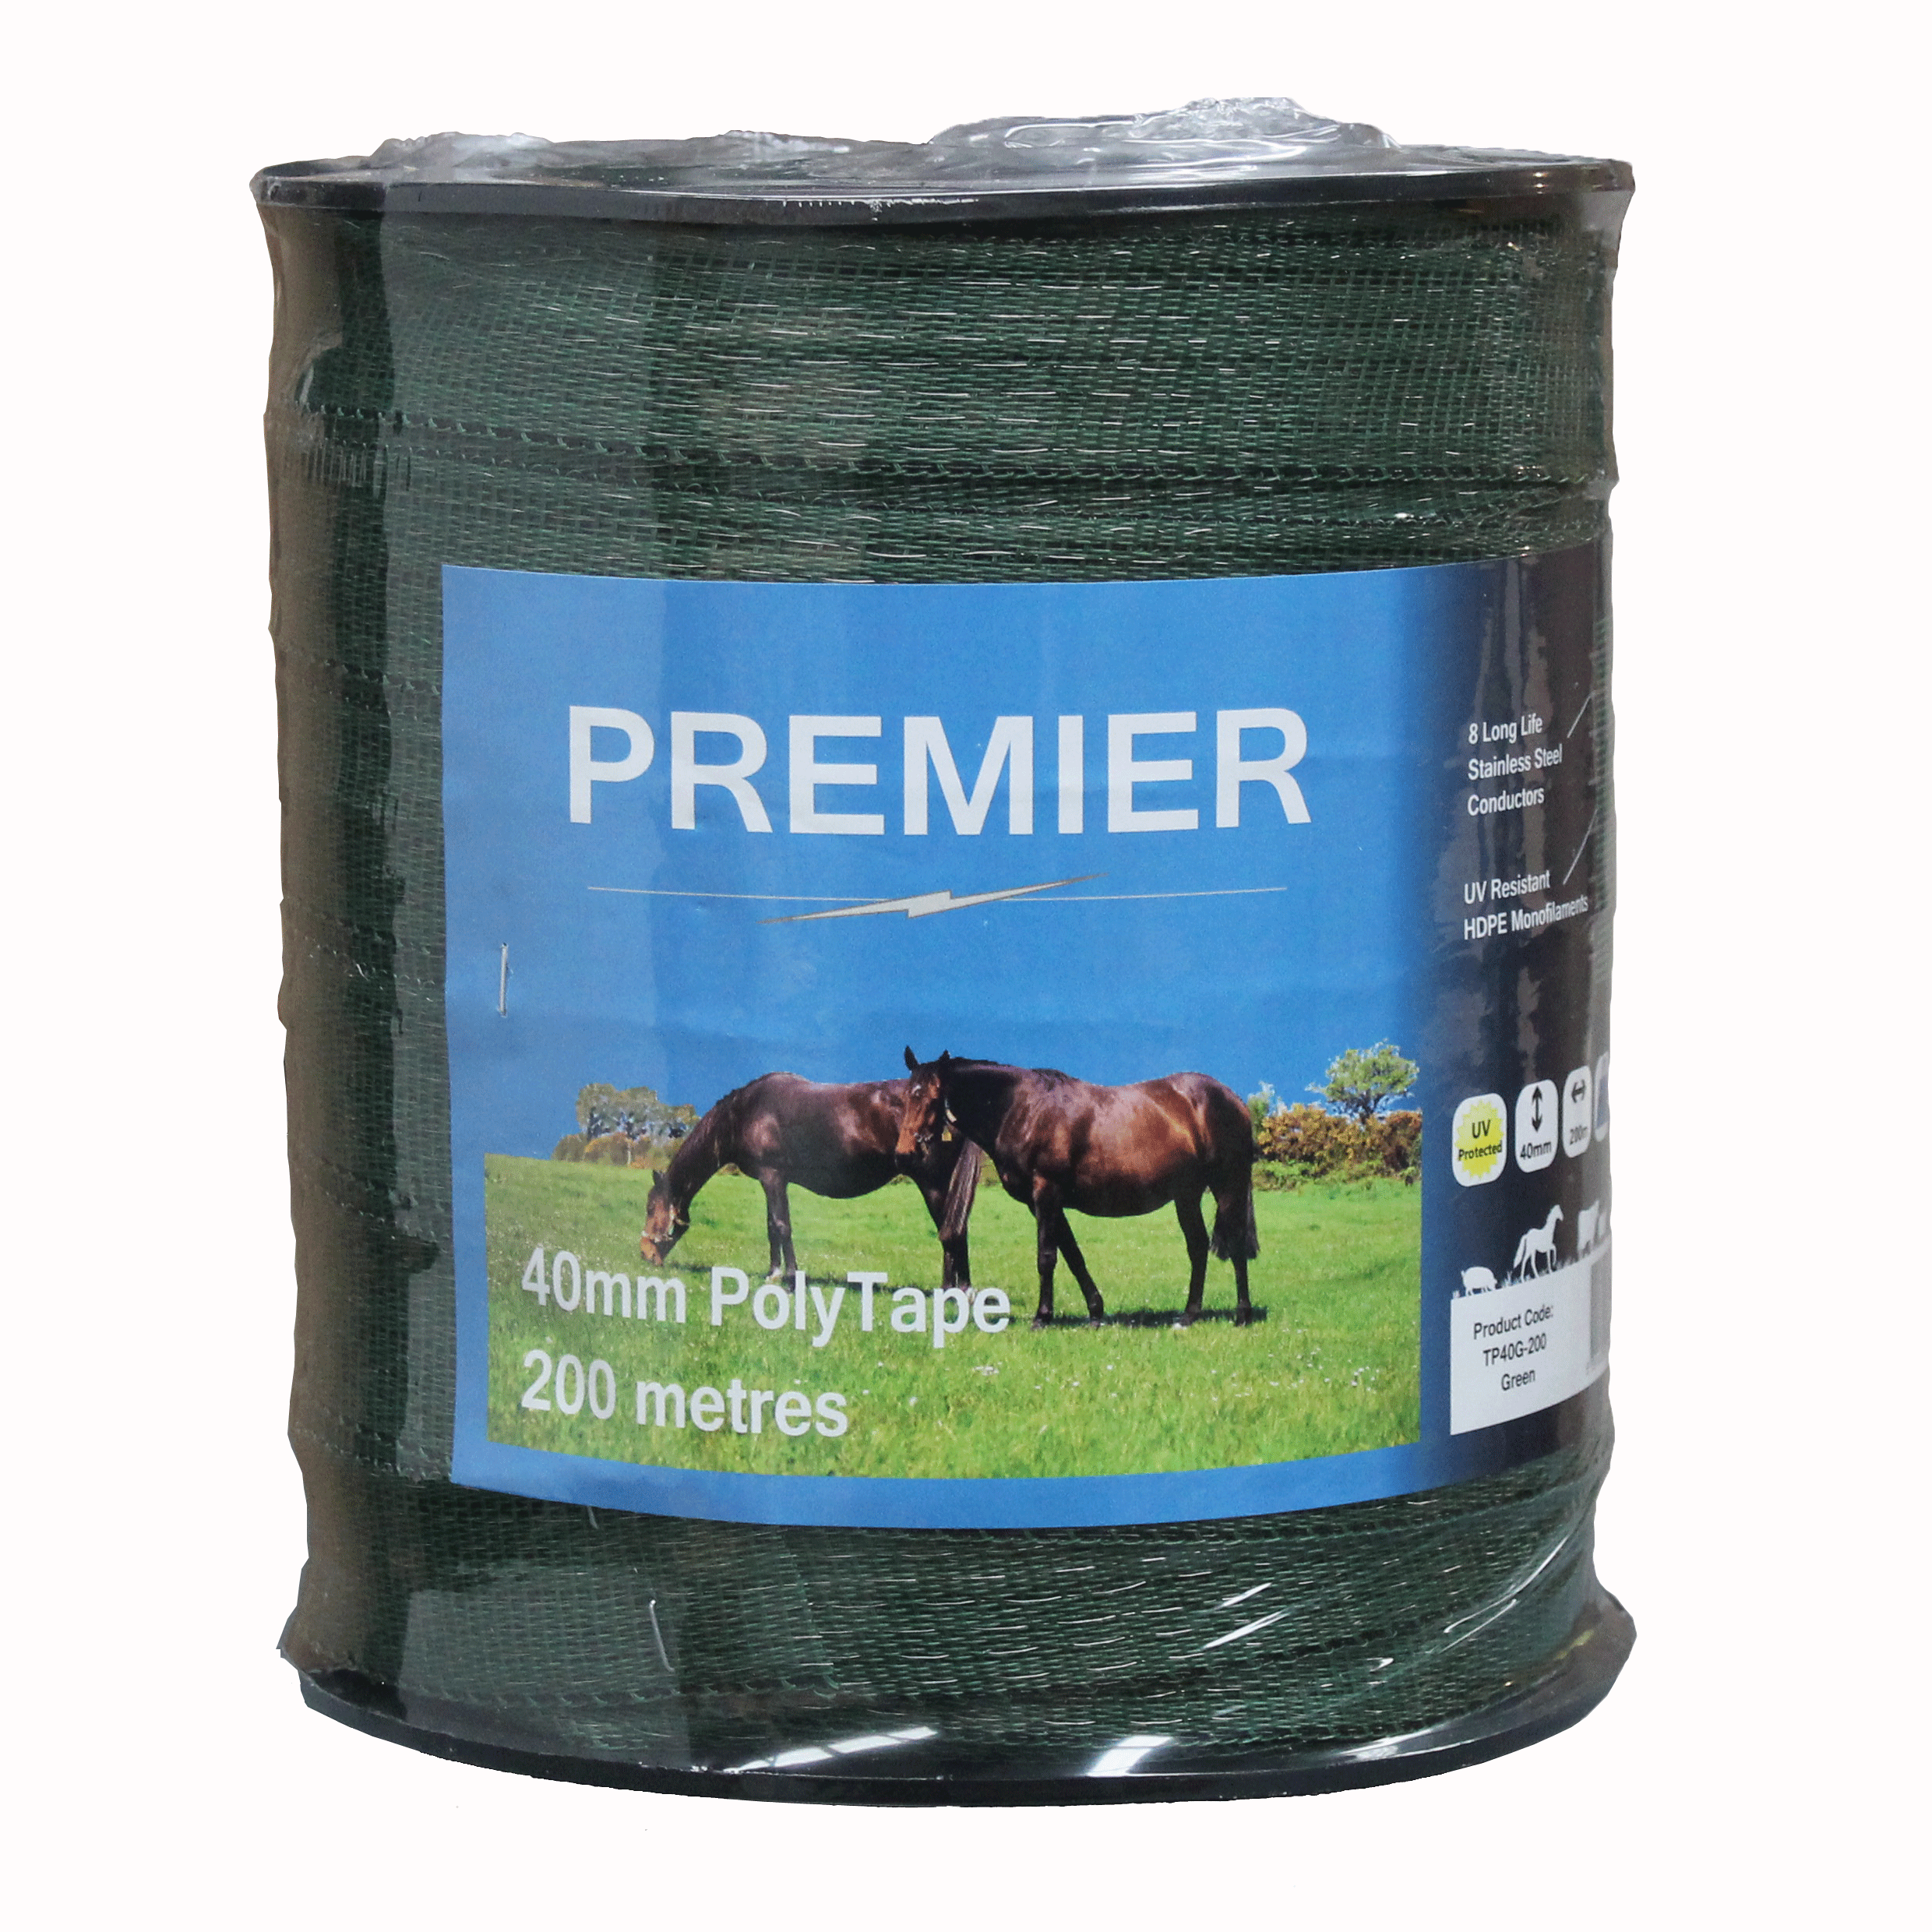 Green Premier 40mm Electric Fence Tape